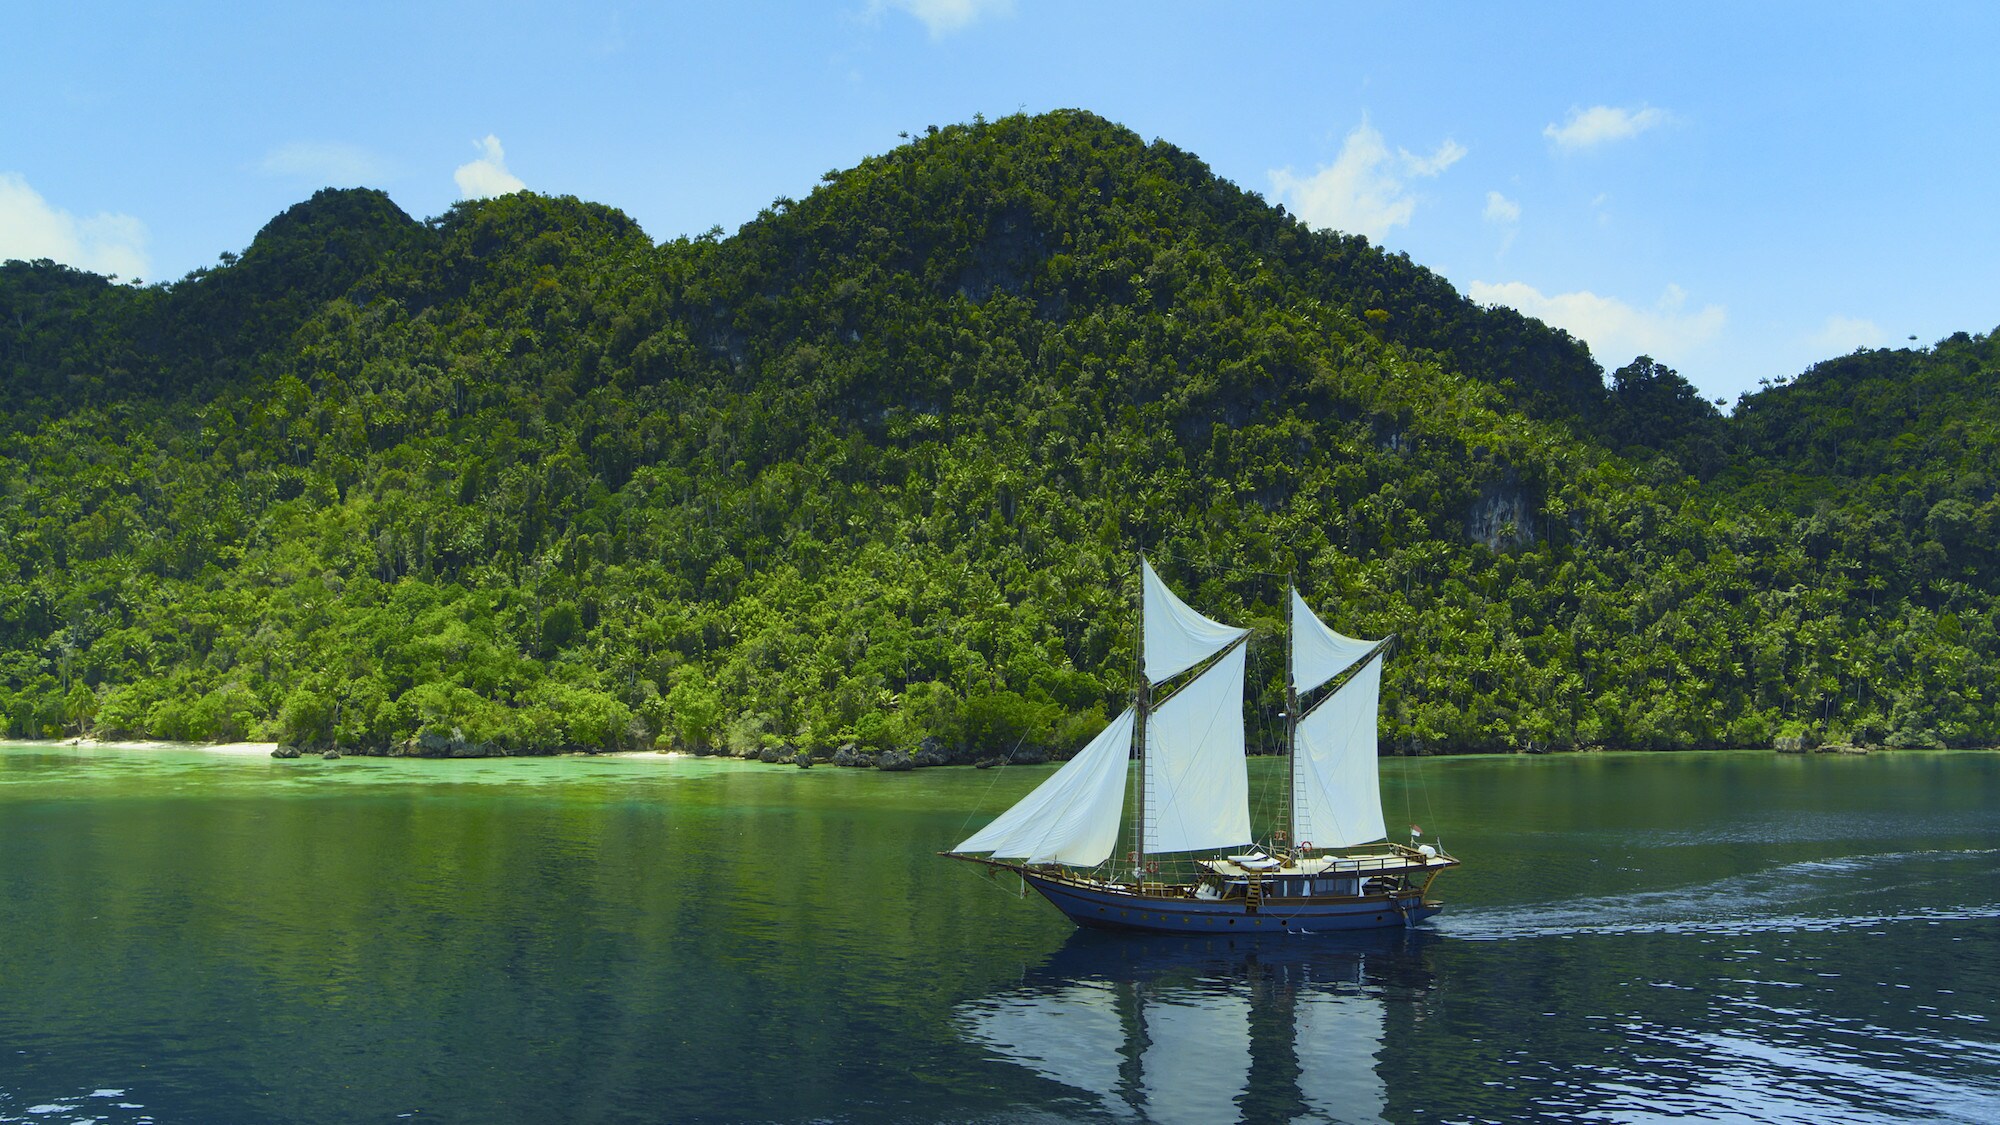 Dewata sailing with islands in the background. (National Geographic for Disney+/Bertie Gregory)